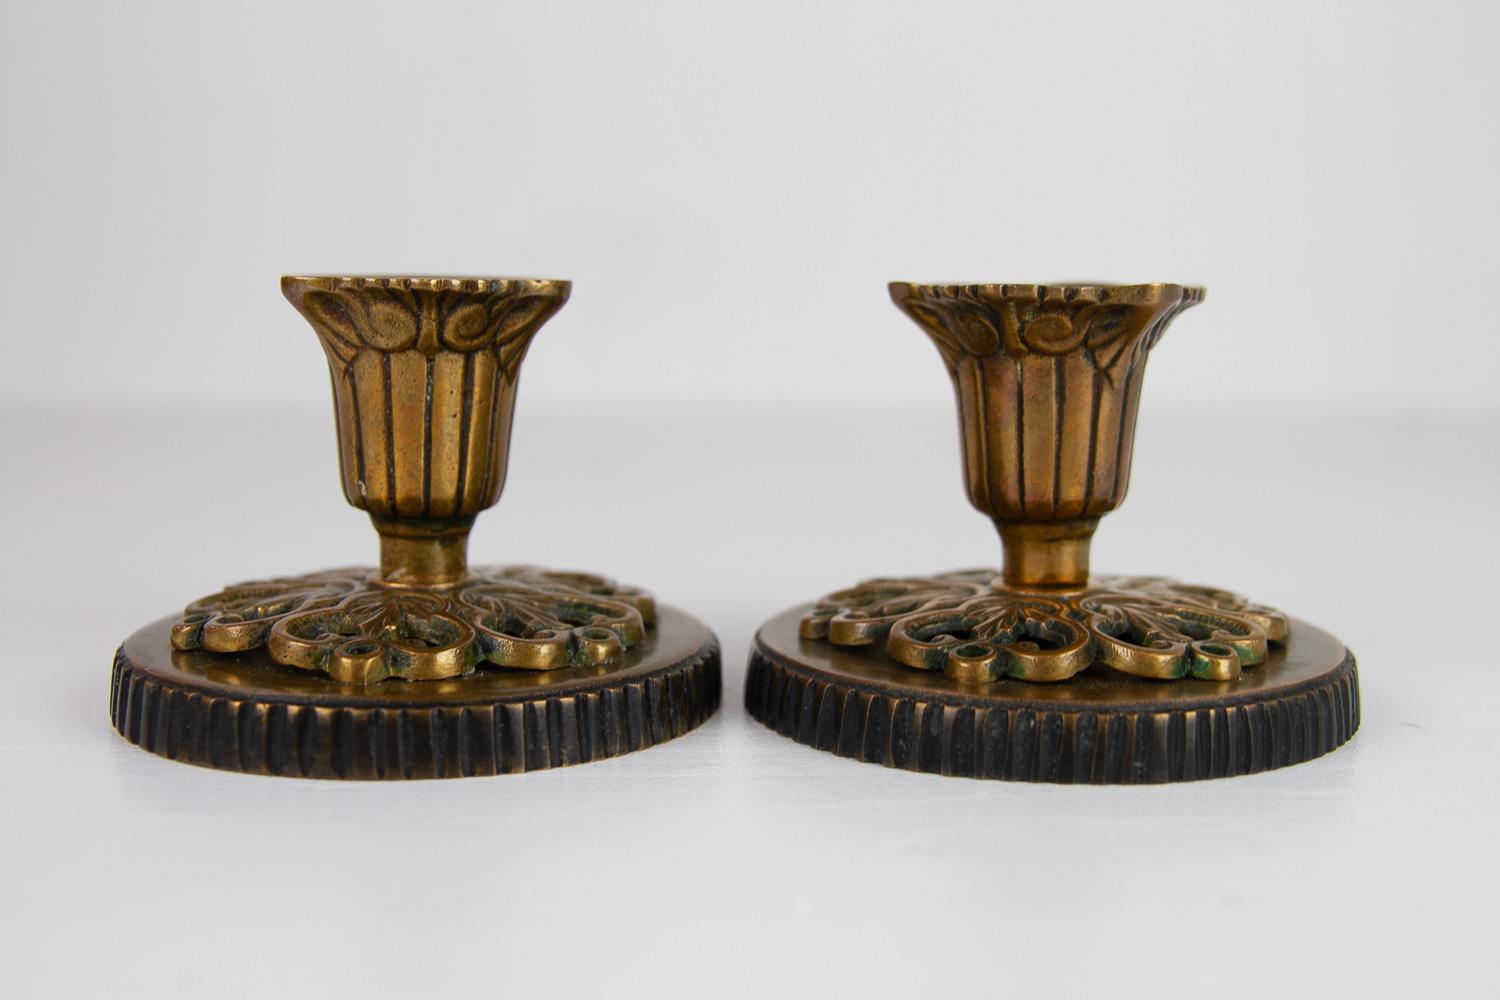 Vintage Danish Art Nouveau Bronze Candleholders, 1930s. Set of 2. 
Lovely pair of candlestick in the Danish 